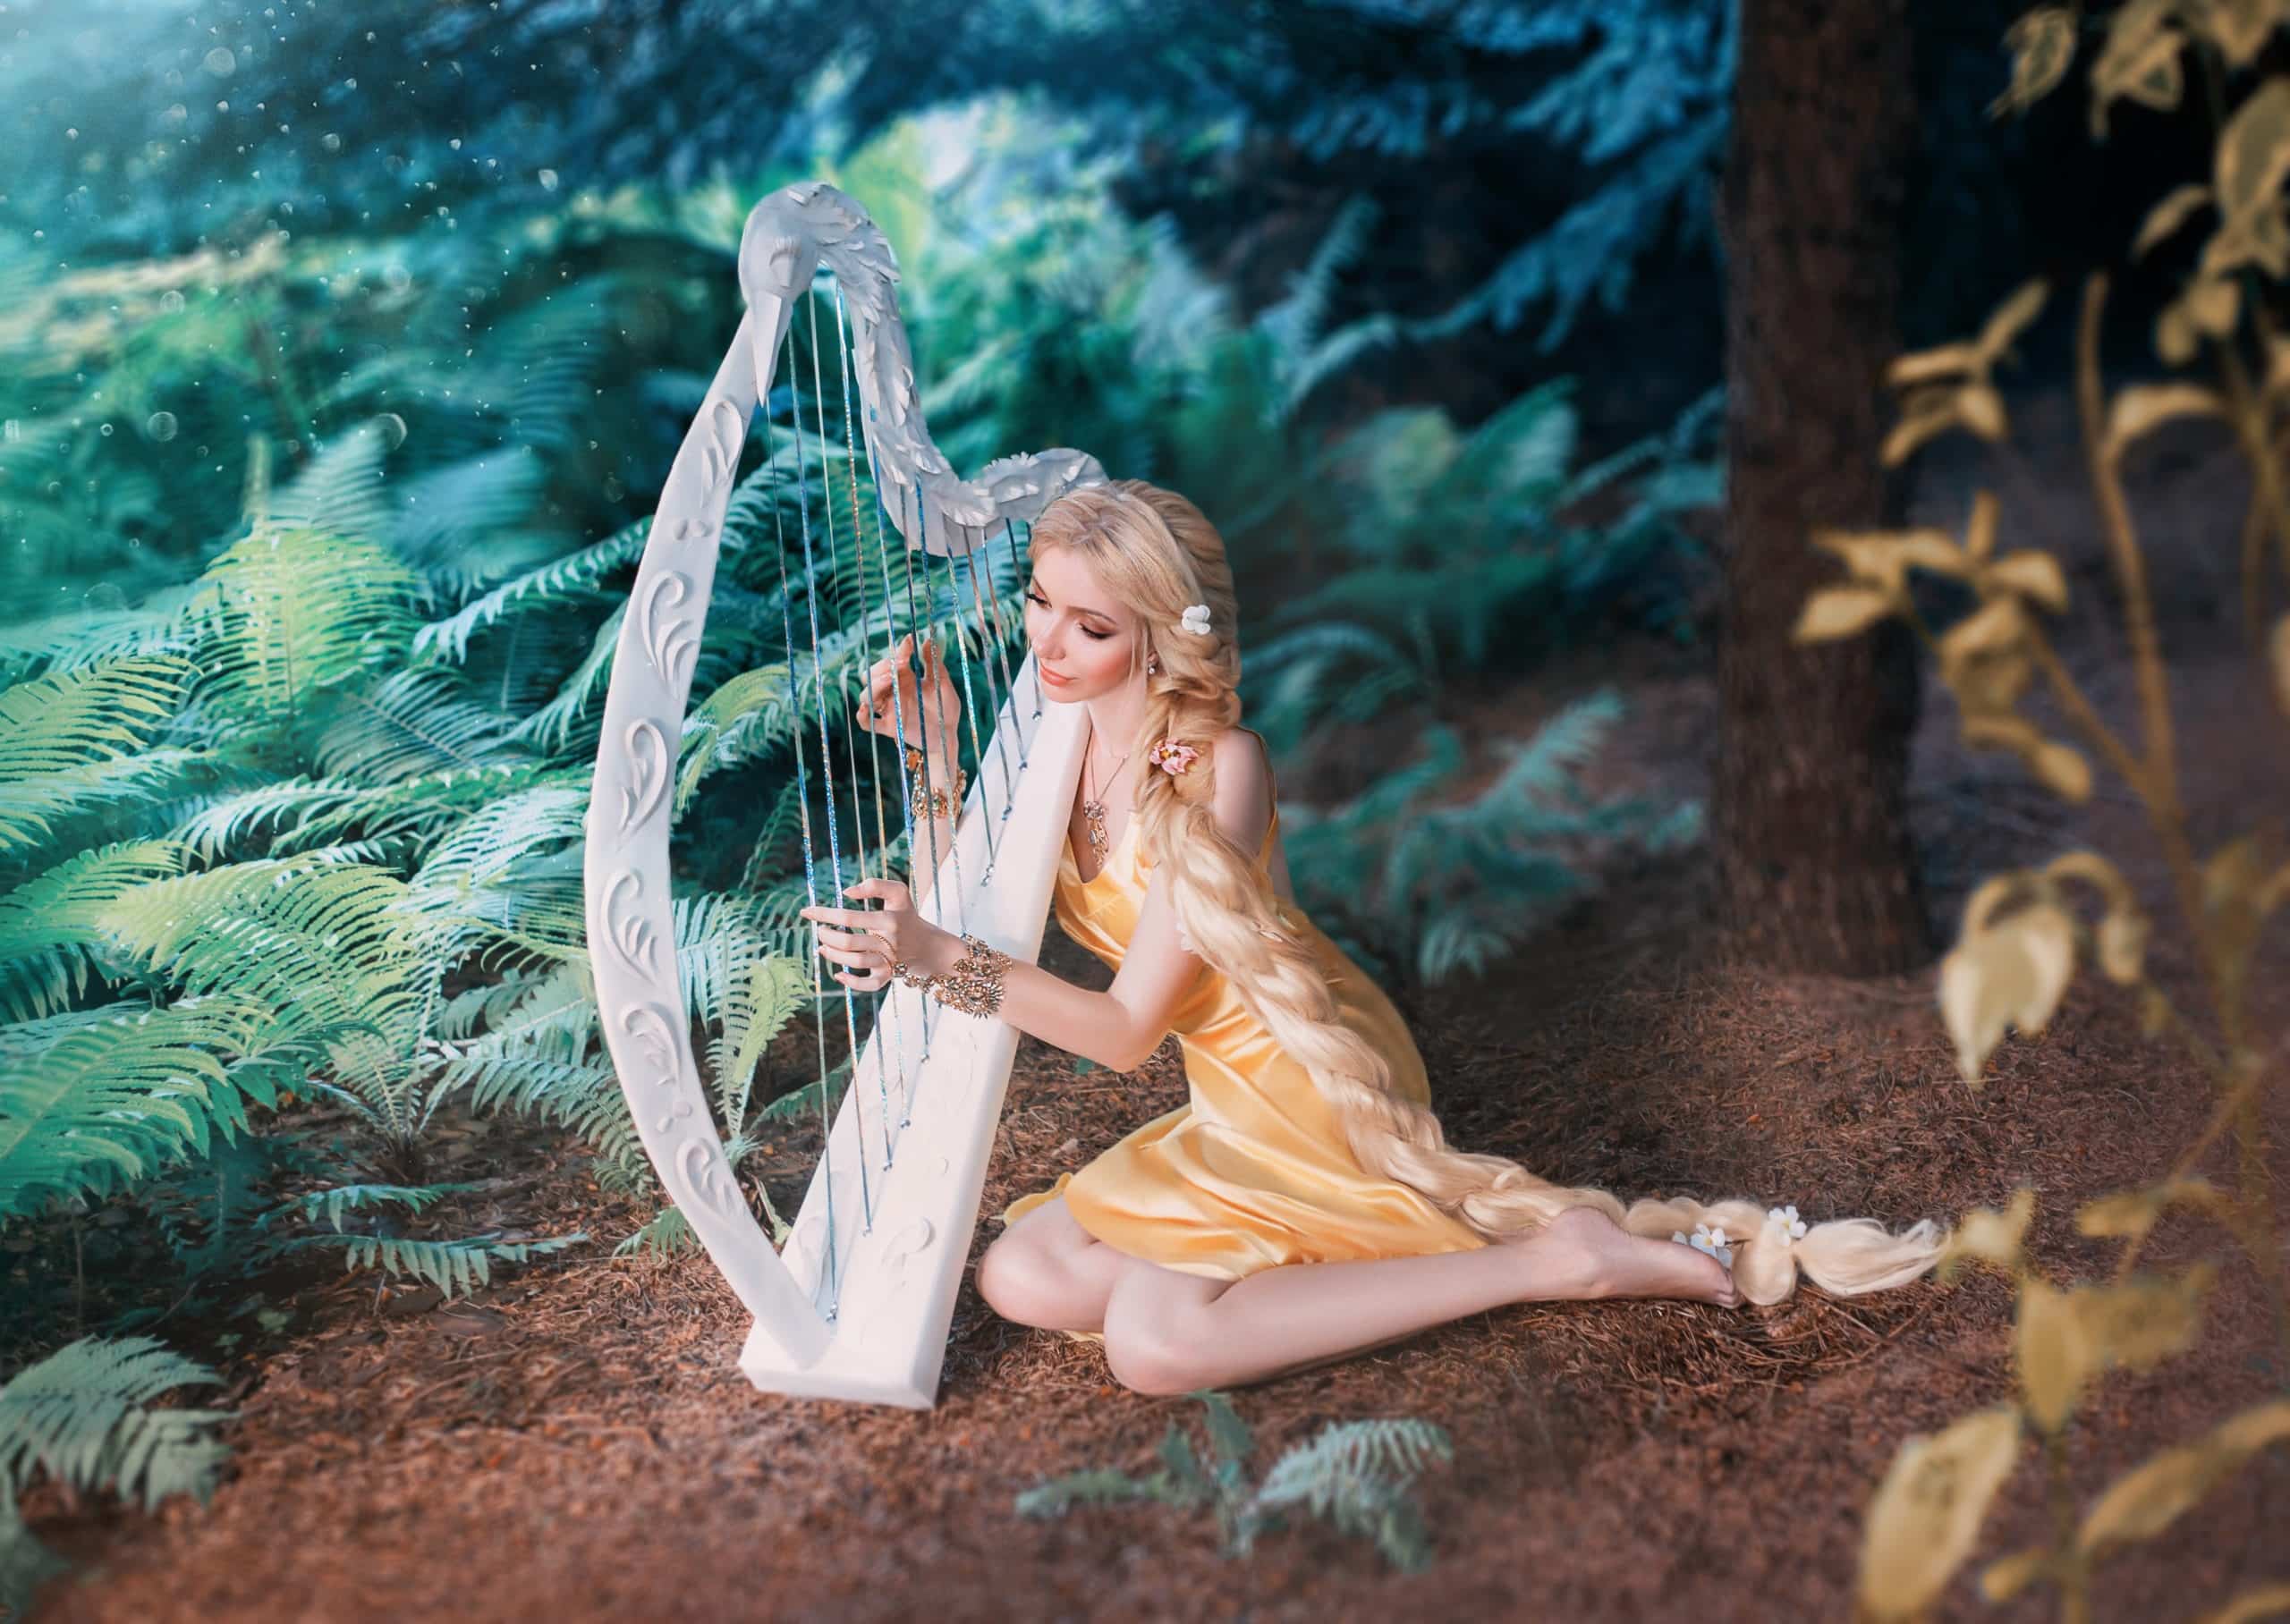 Enchanting woman with long blond hair playing a lyre in the forest.